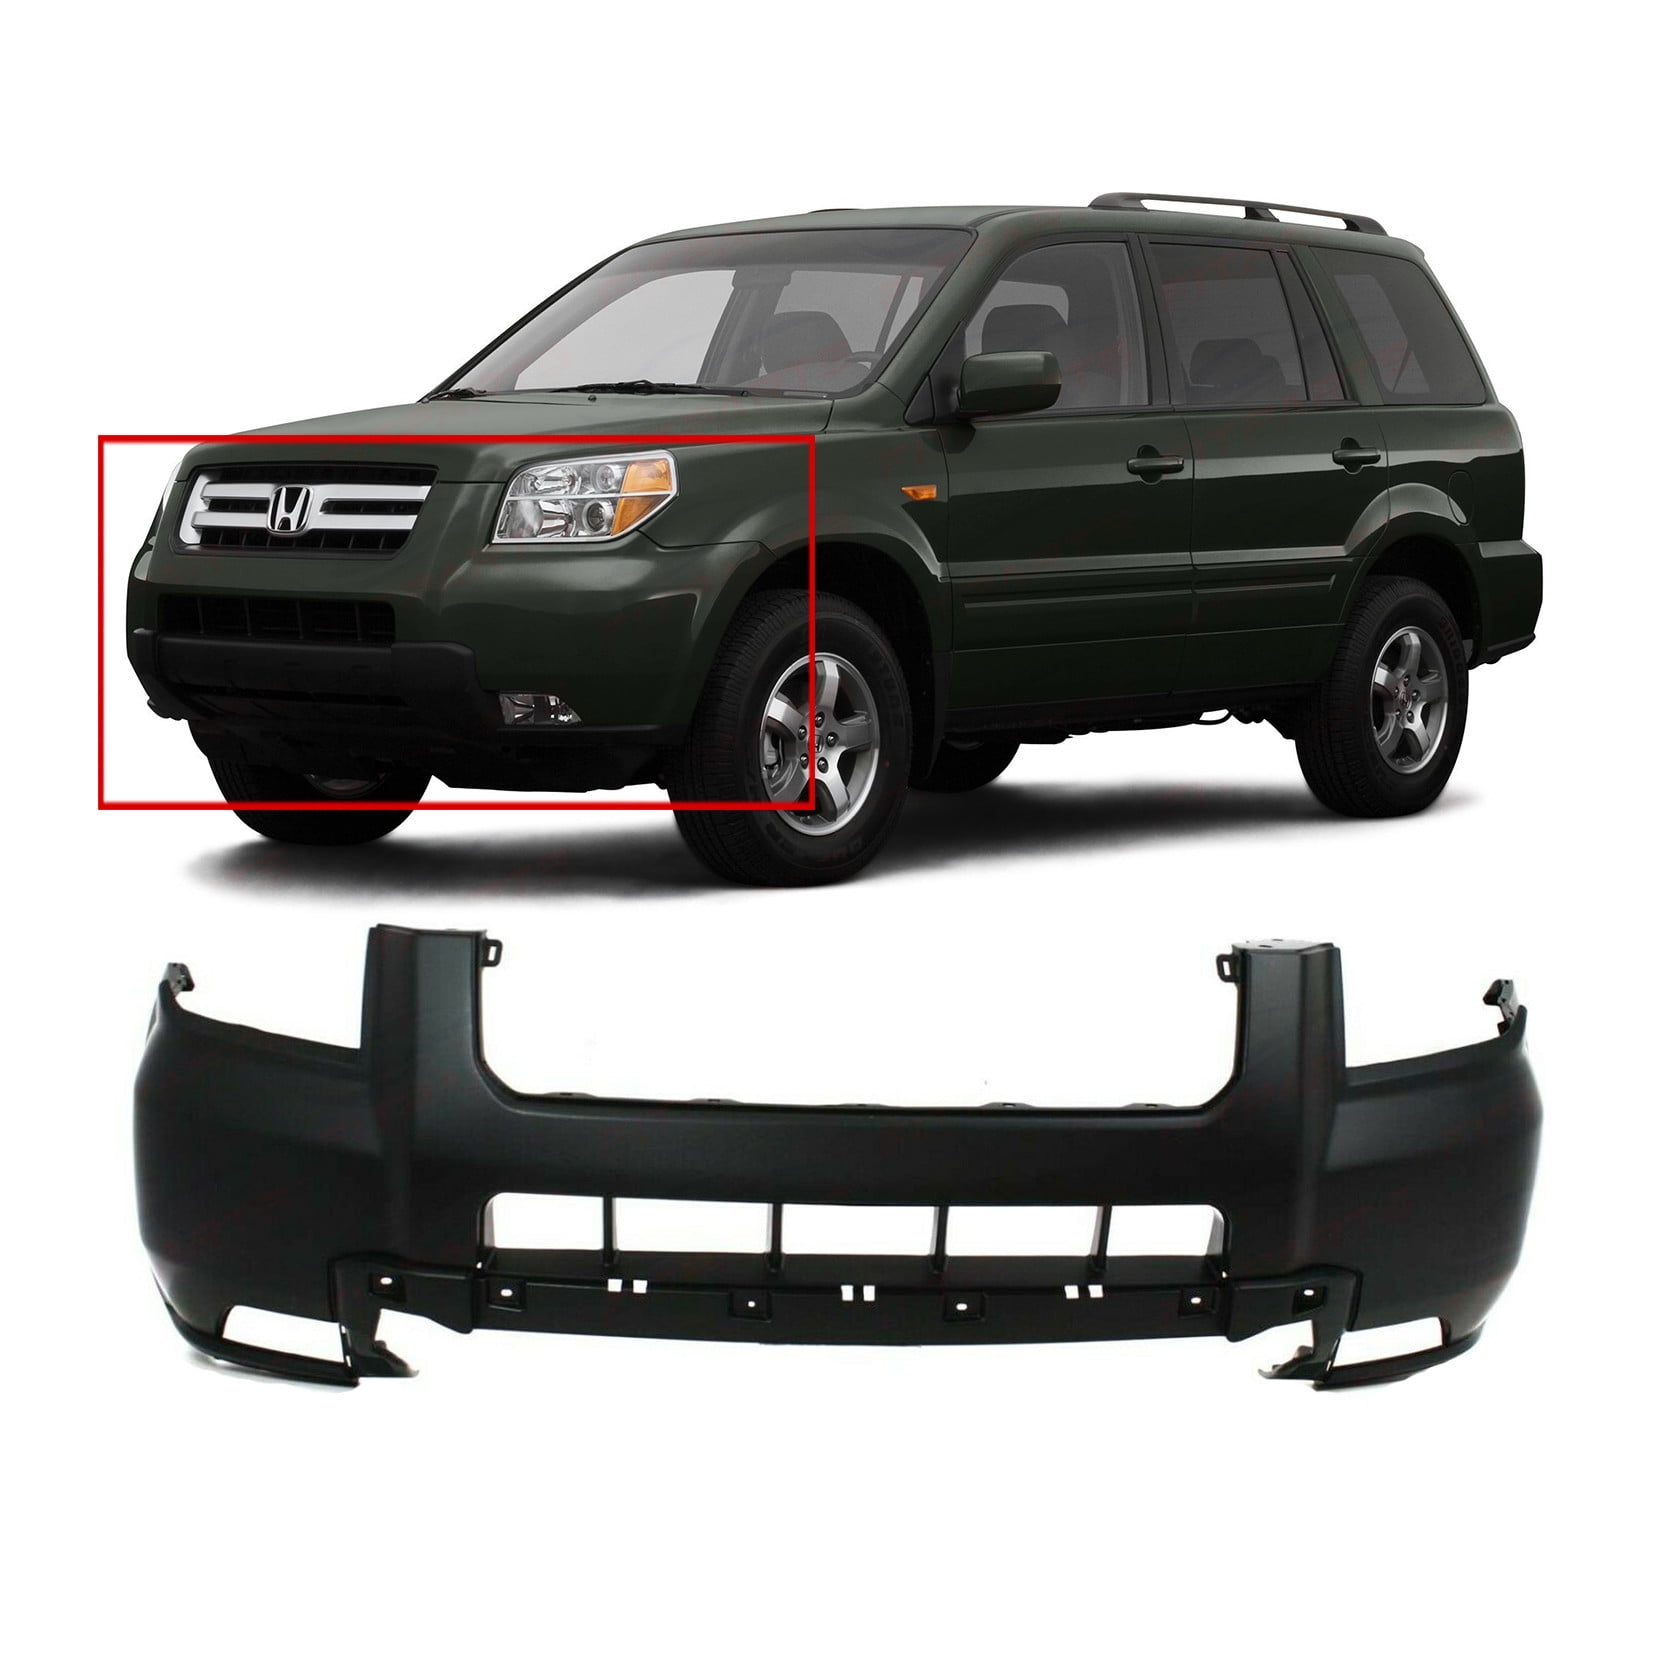 New All Balls Shock Bumper 37-1221 TRX450R 2004-2009 Compatible with/Replacement For Honda TRX450ER 2006-2014